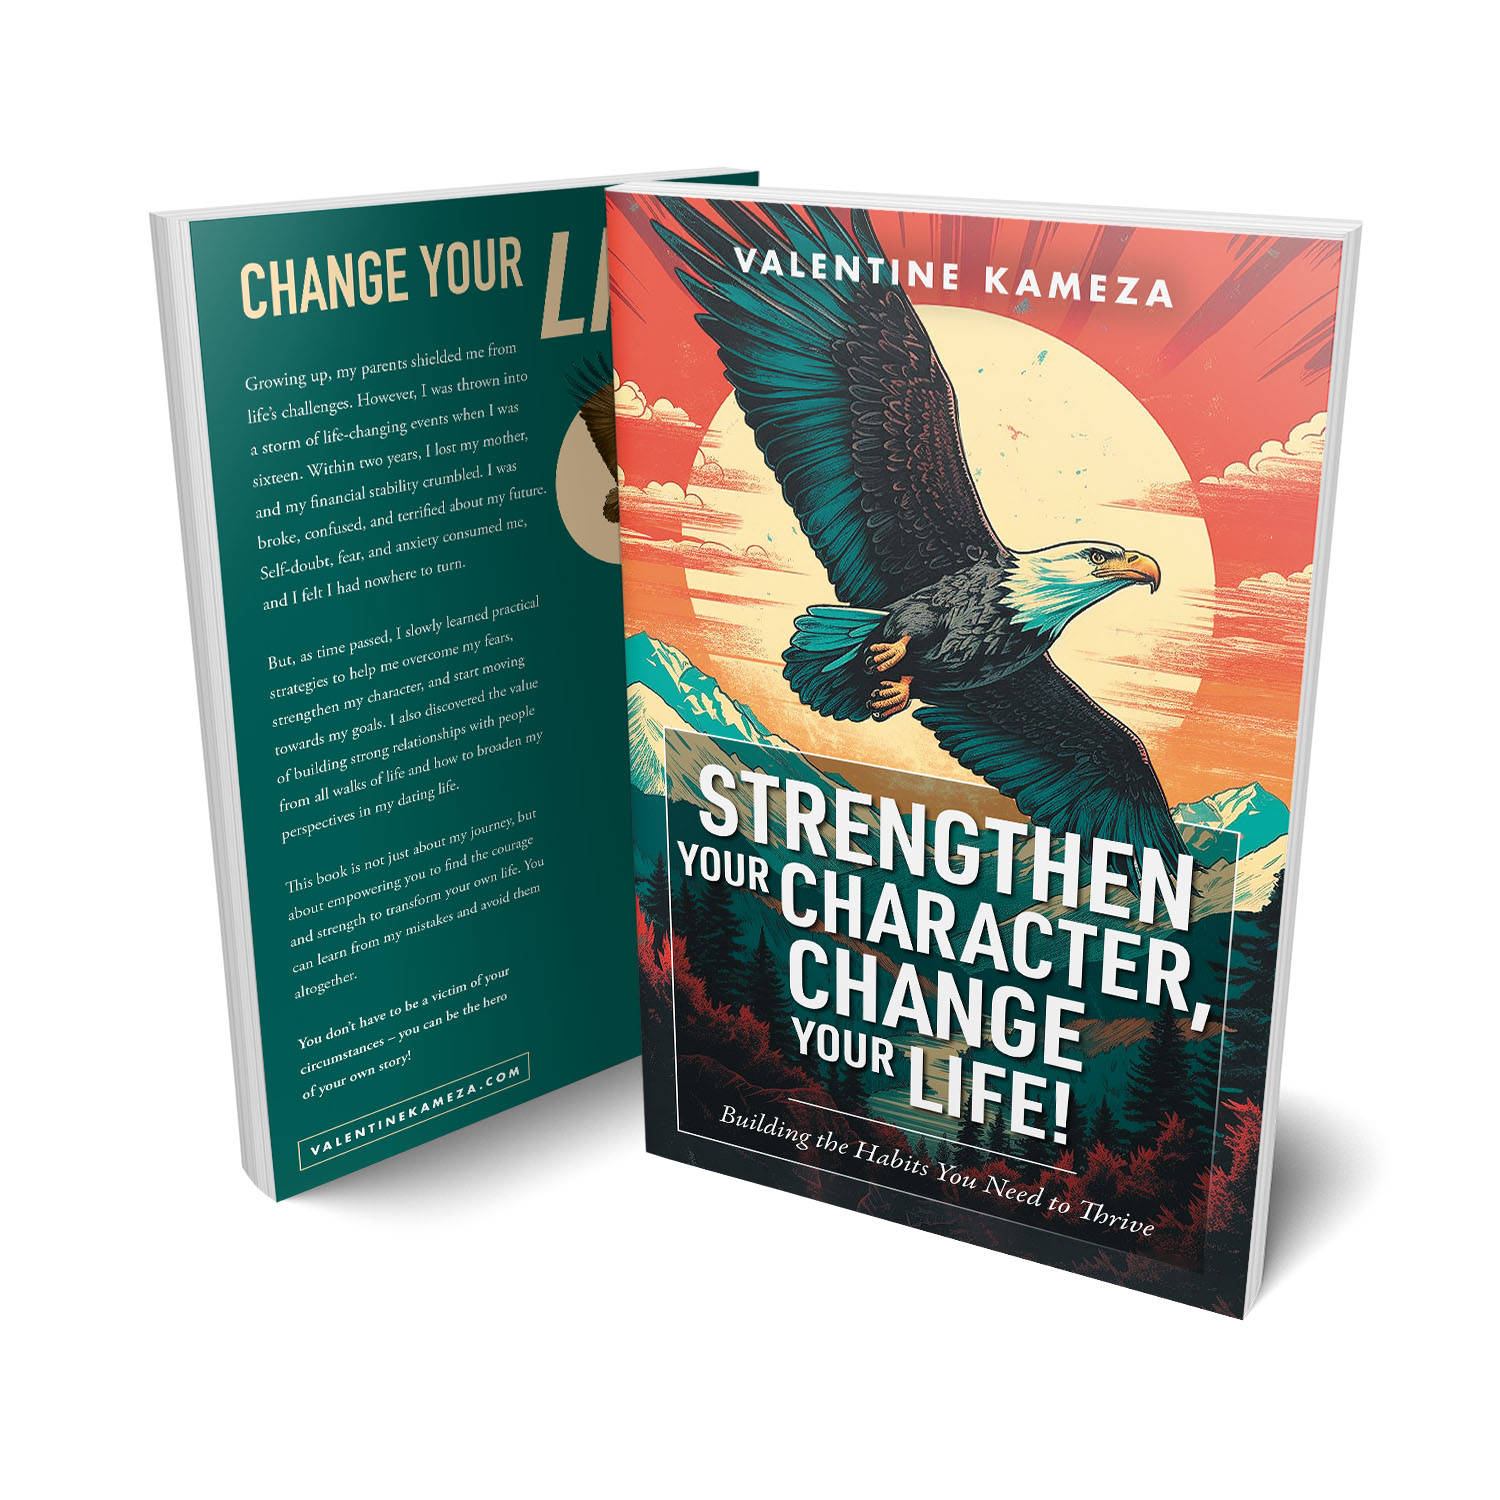 'Strengthen Your Character…" is an uplifting self-help book by Valentine Kameza. The book cover design is by Mark Thomas of Coverness. To learn more about what Mark could do for your book, please visit coverness.com.